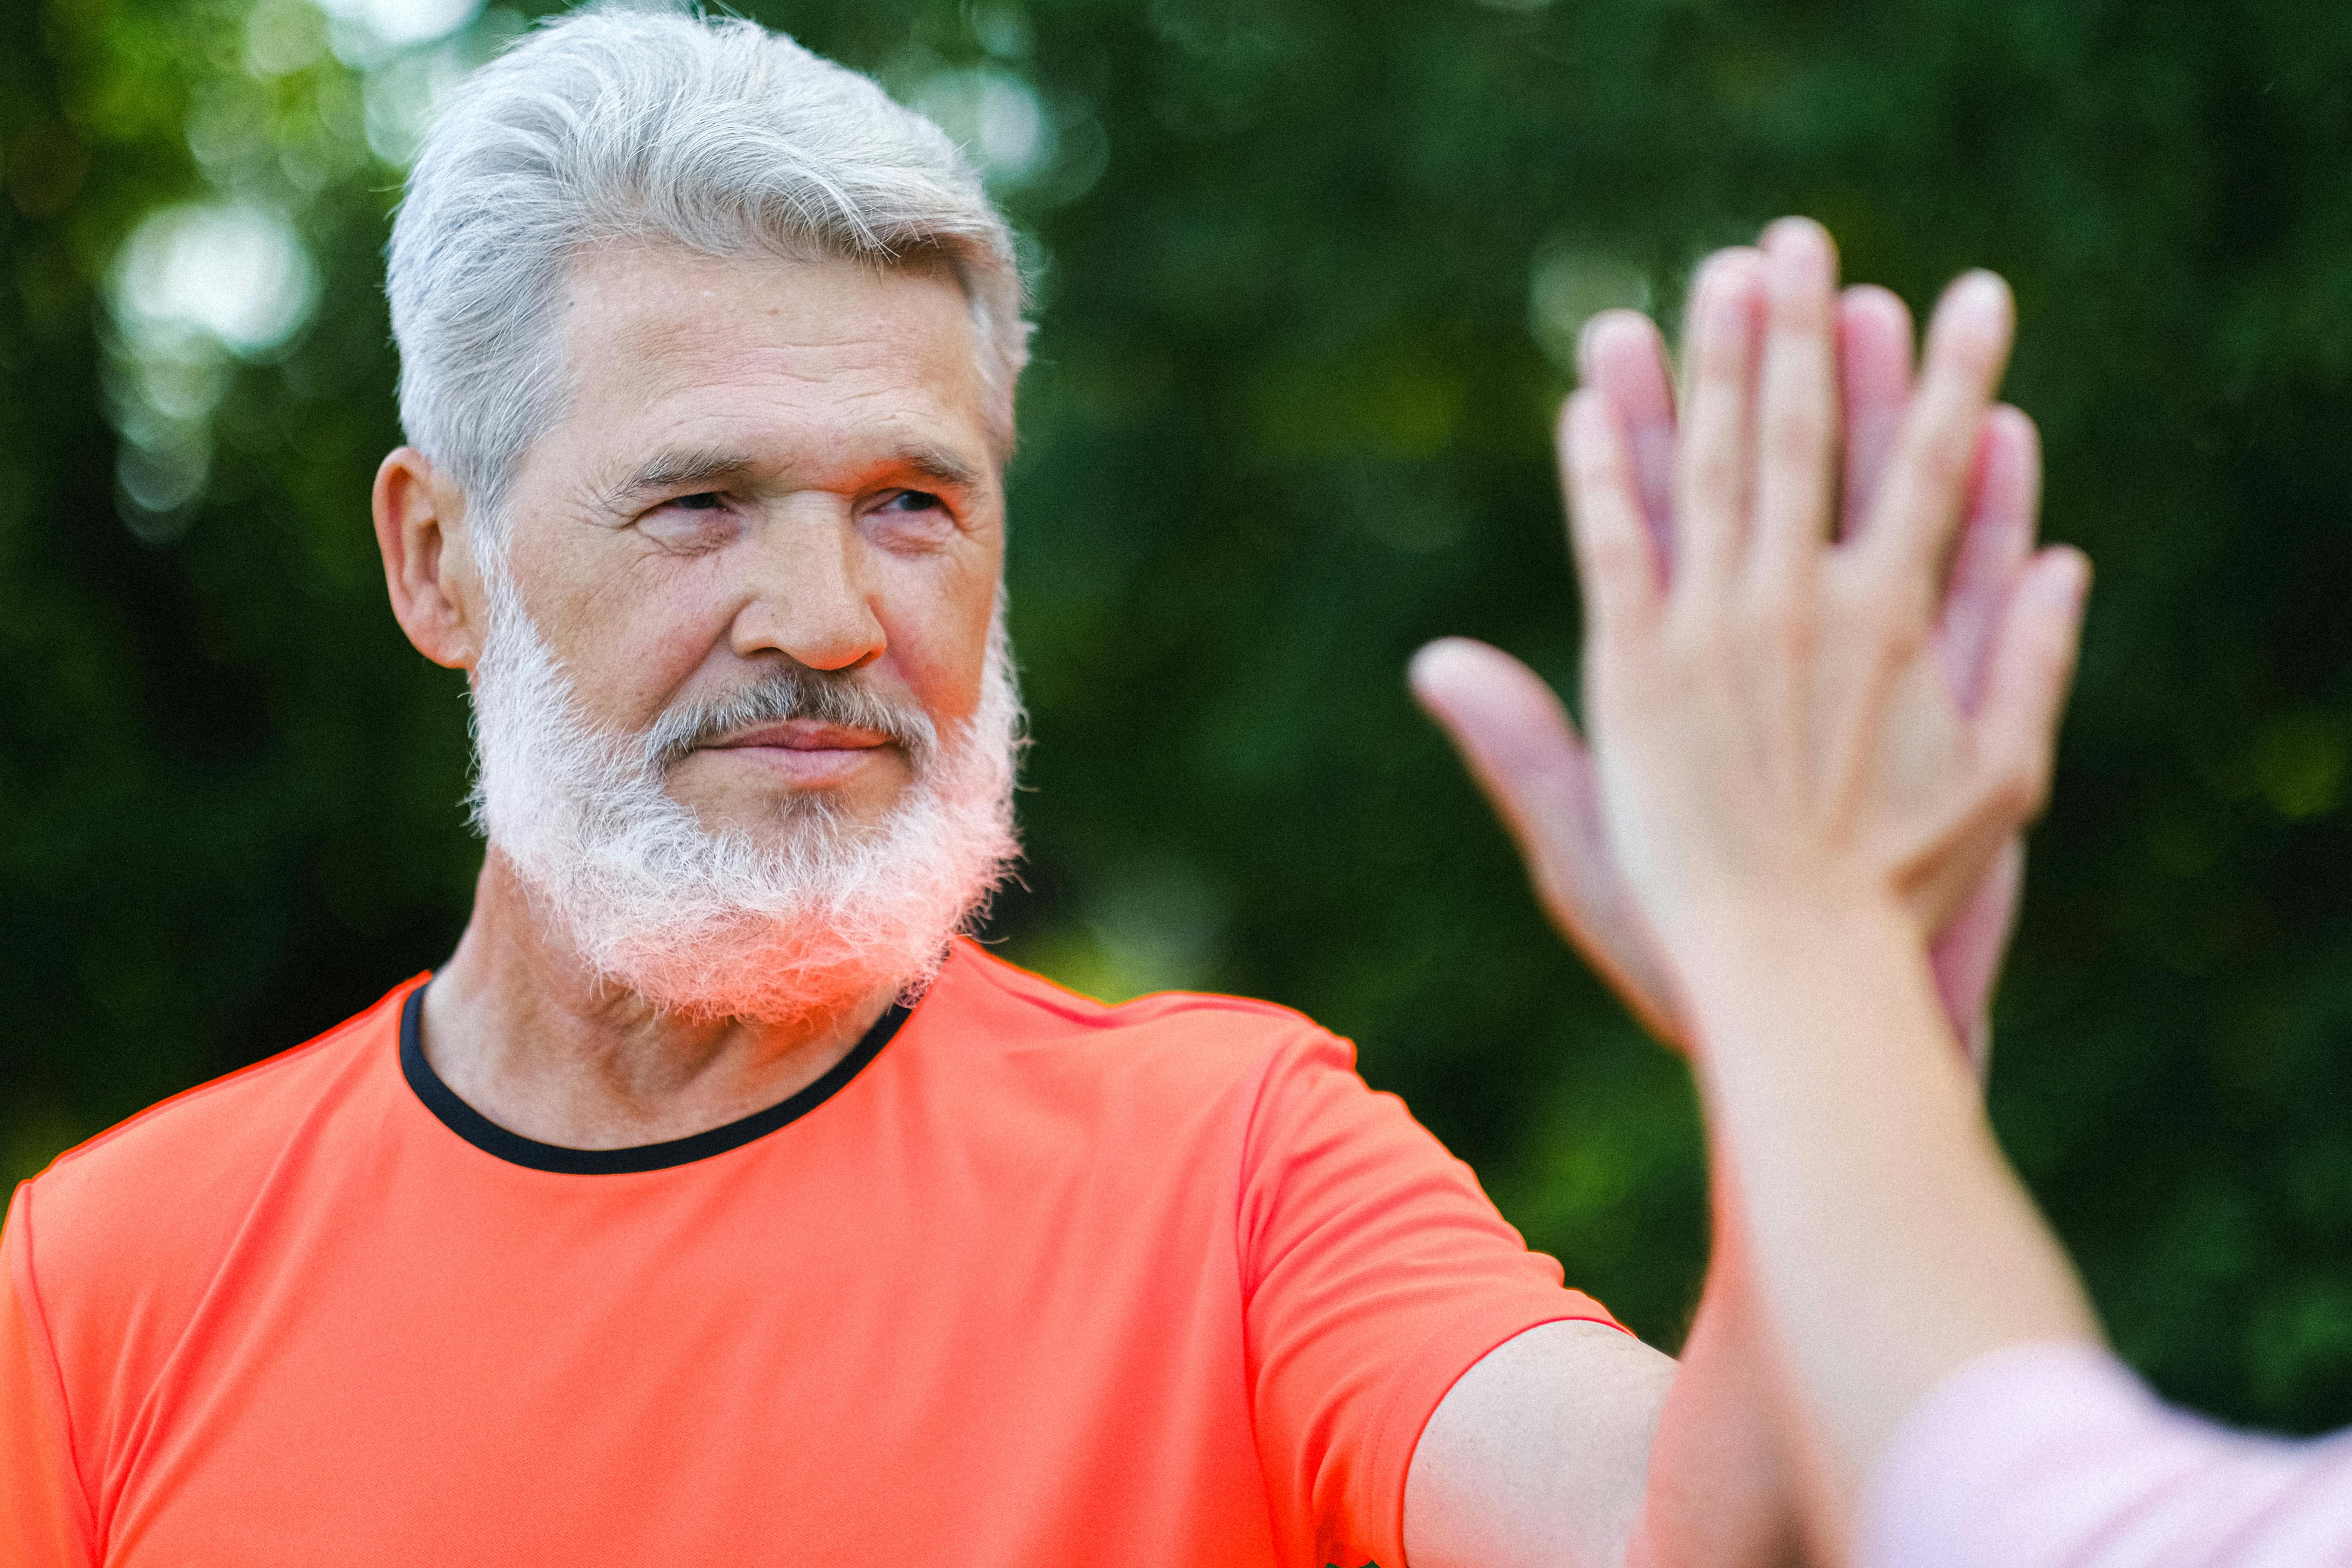 A man giving a high-five to someone off-camera | Source: Pexels